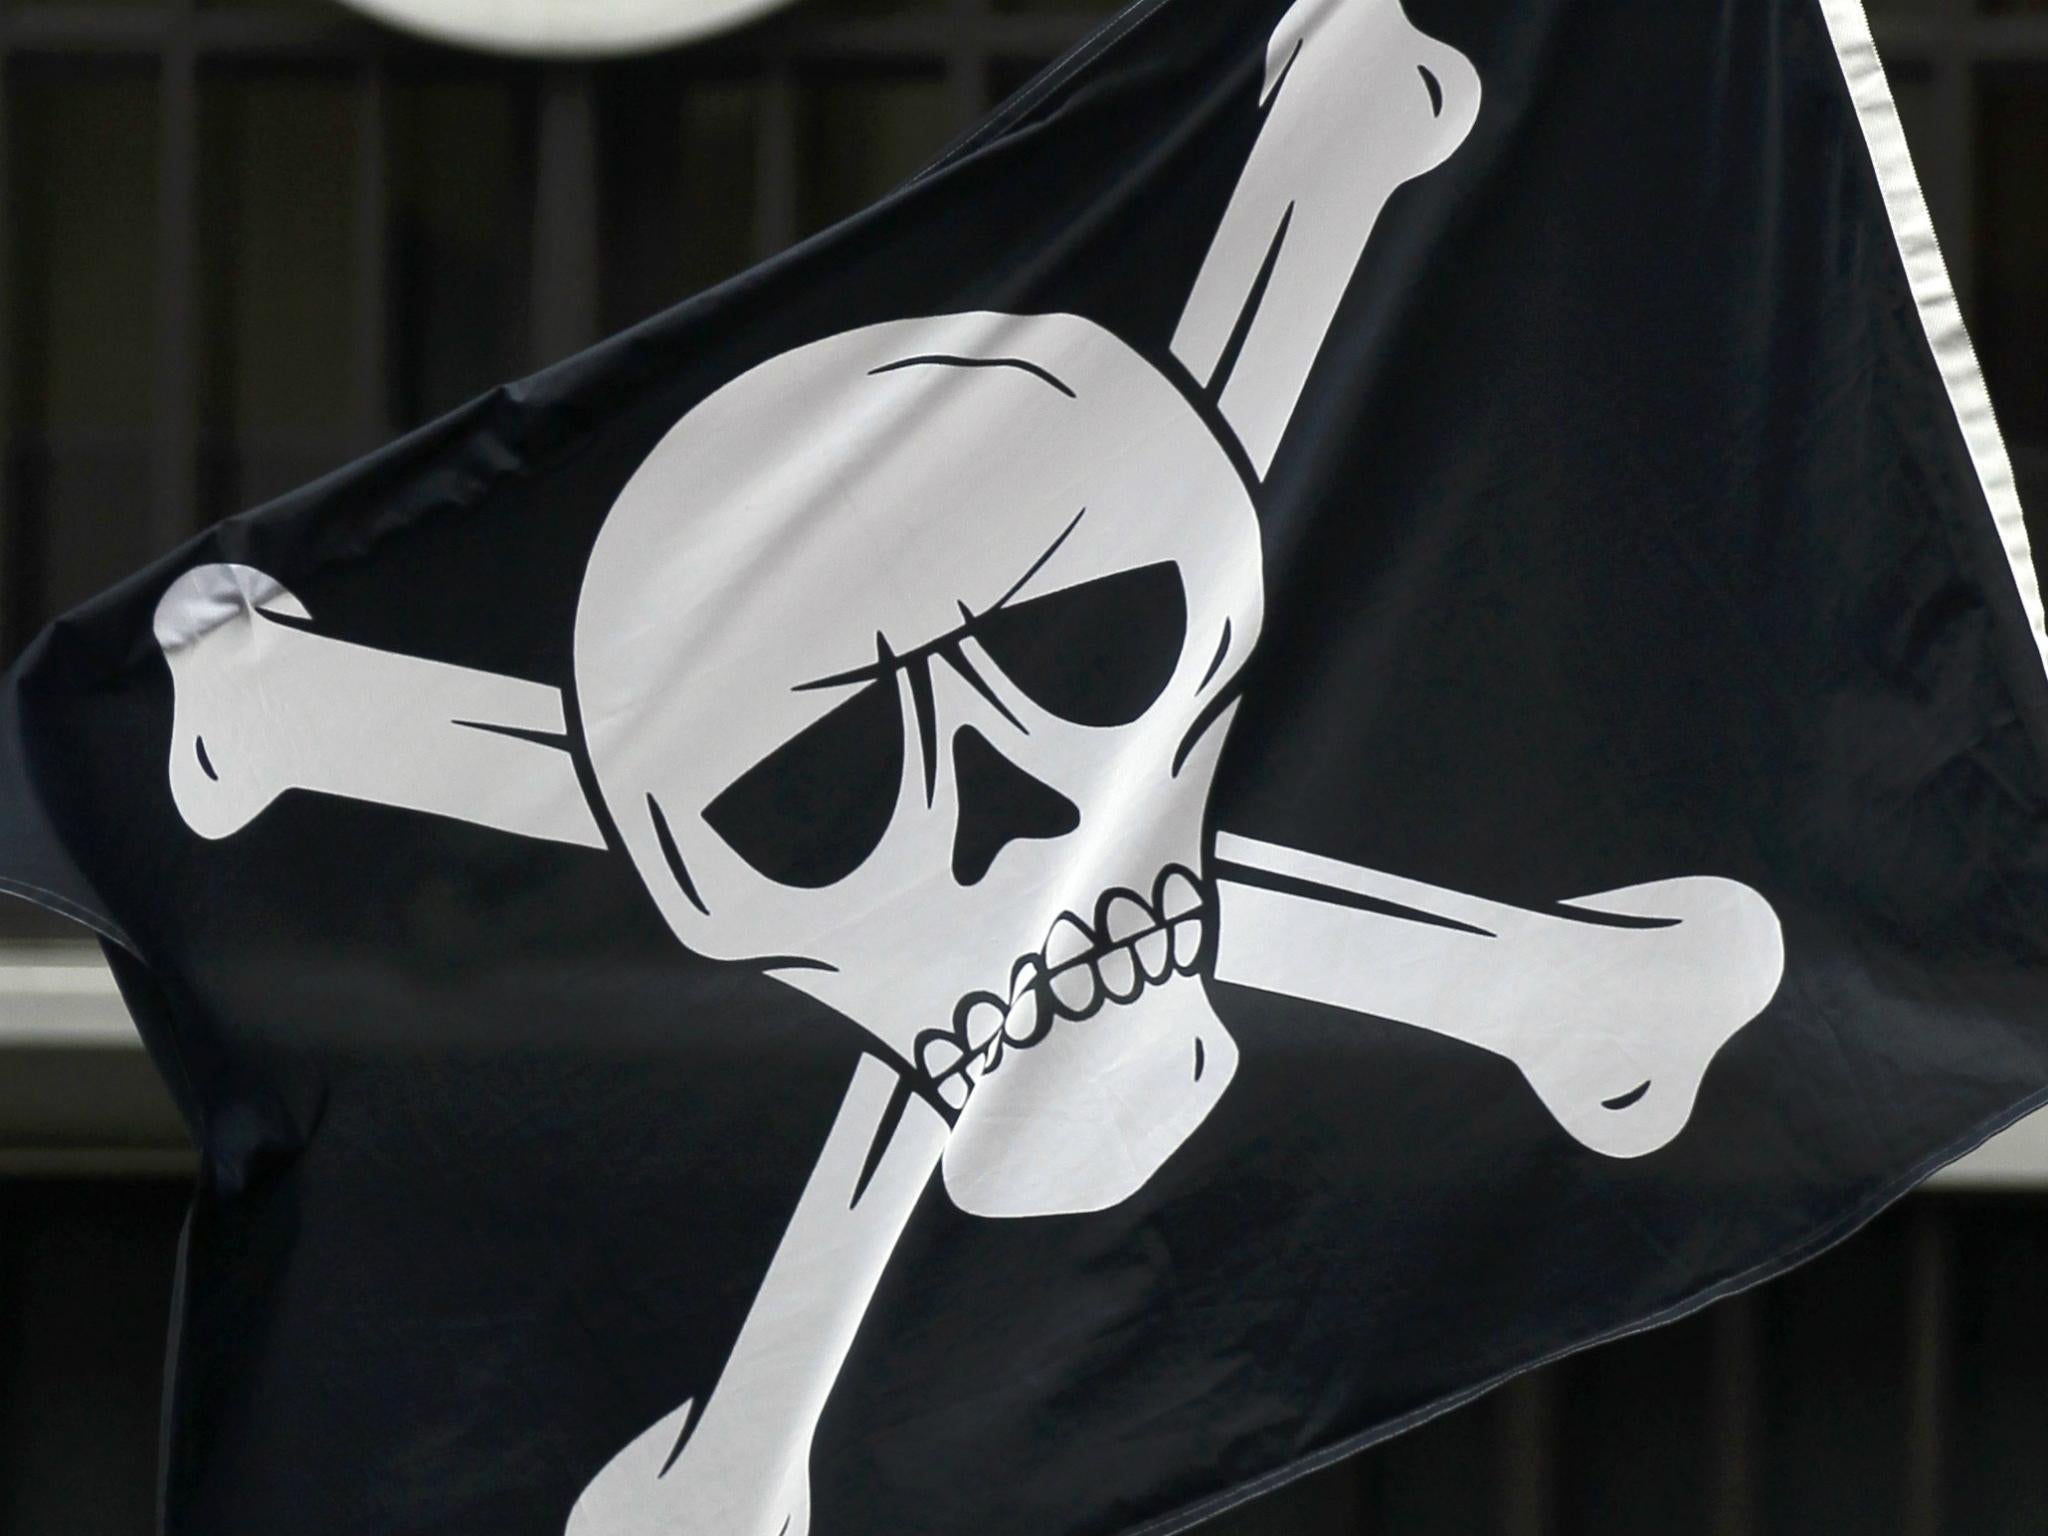 Does piracy pay? Not for the Pirate Bay